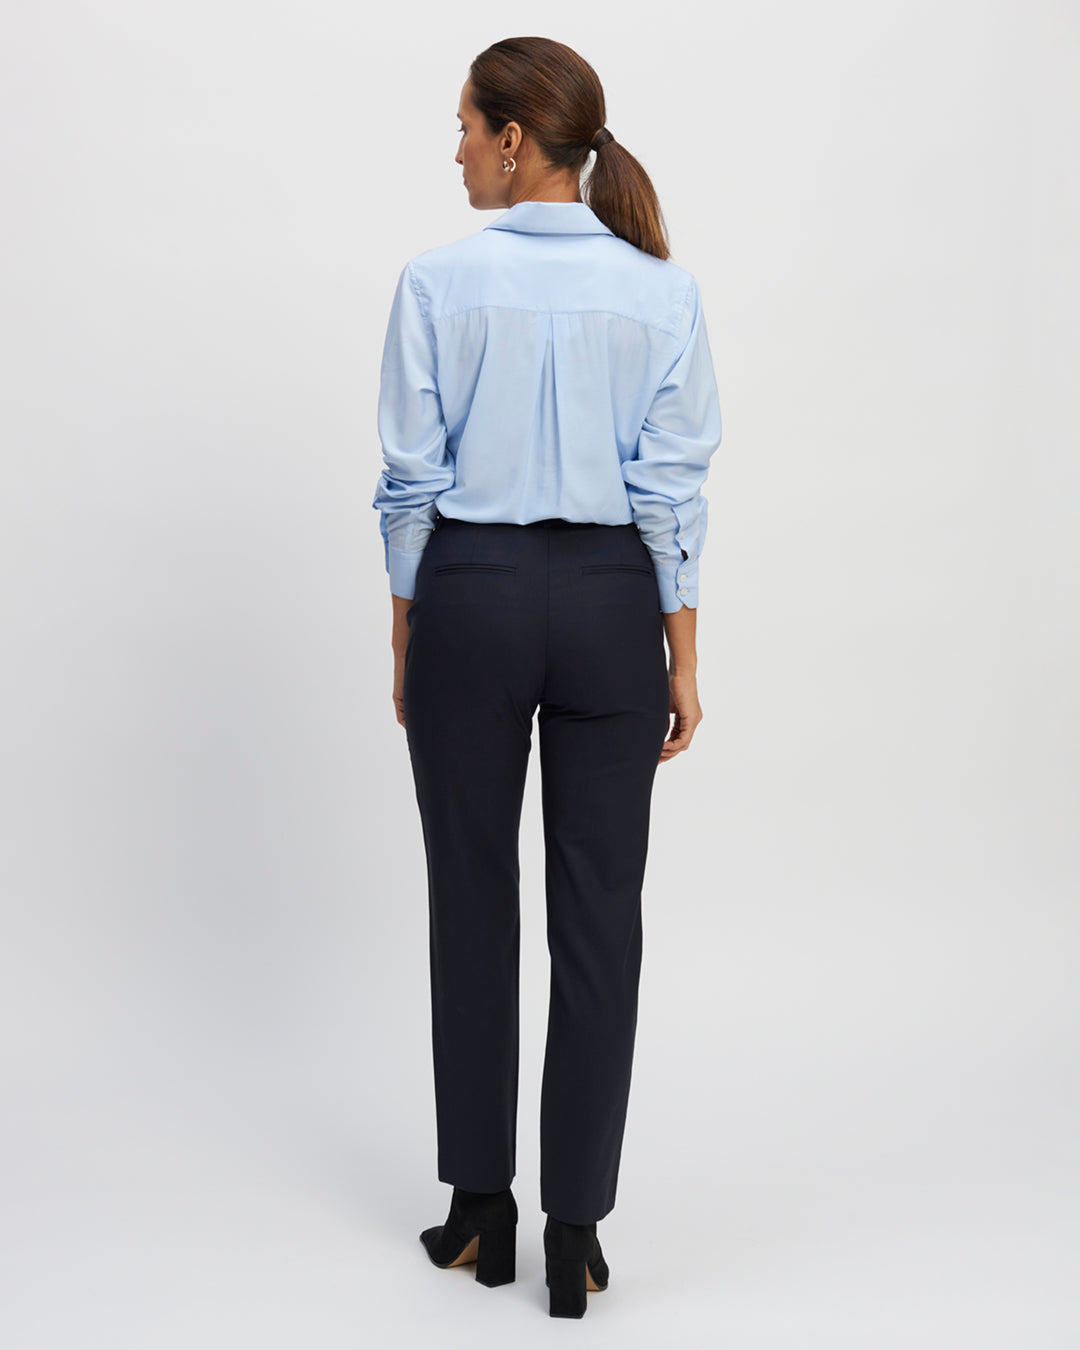 "Navy-blue trouser-tailor-Cigarette-cutter-Mid-rise-waist-Faux-cavalier-pockets-in-front-Wired-poise-pockets-in-back-Passing-for-belt-Zip-and-hook-closure-Camel-tips-17H10-tailor-tailors-for-women-paris-"